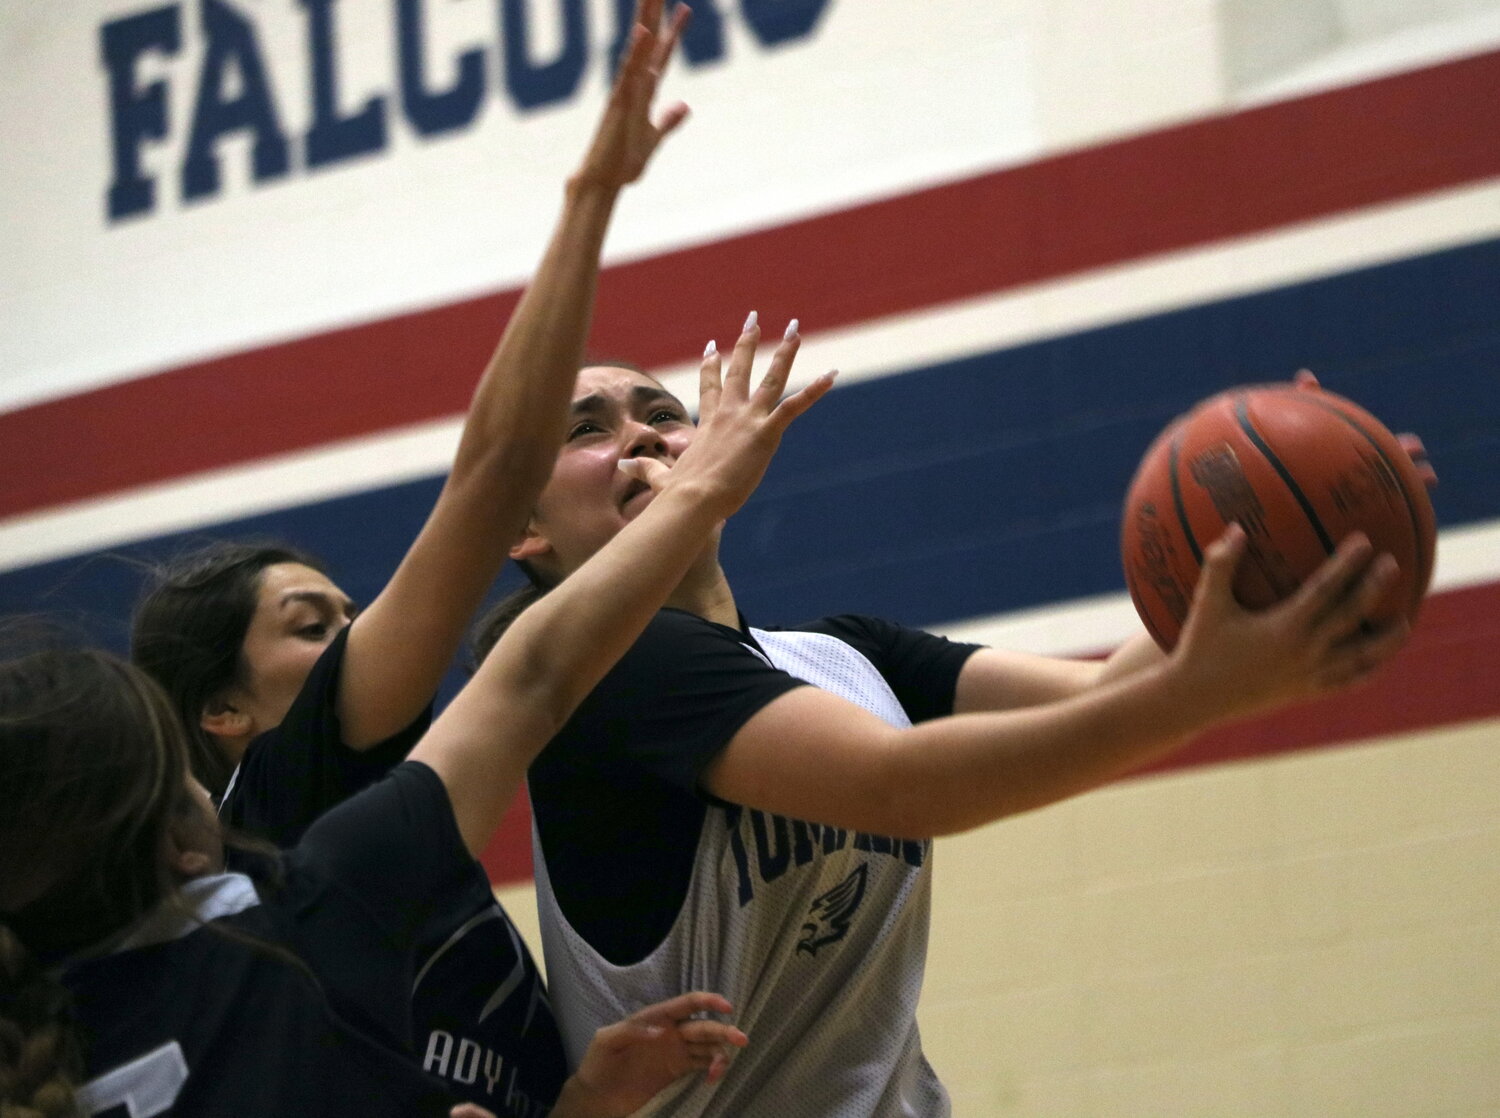 Rihanna DeLeon shoots a layup over two Laredo United South defenders during Thursday's game between Tompkins and Laredo United South defenders at the Tompkins gym.